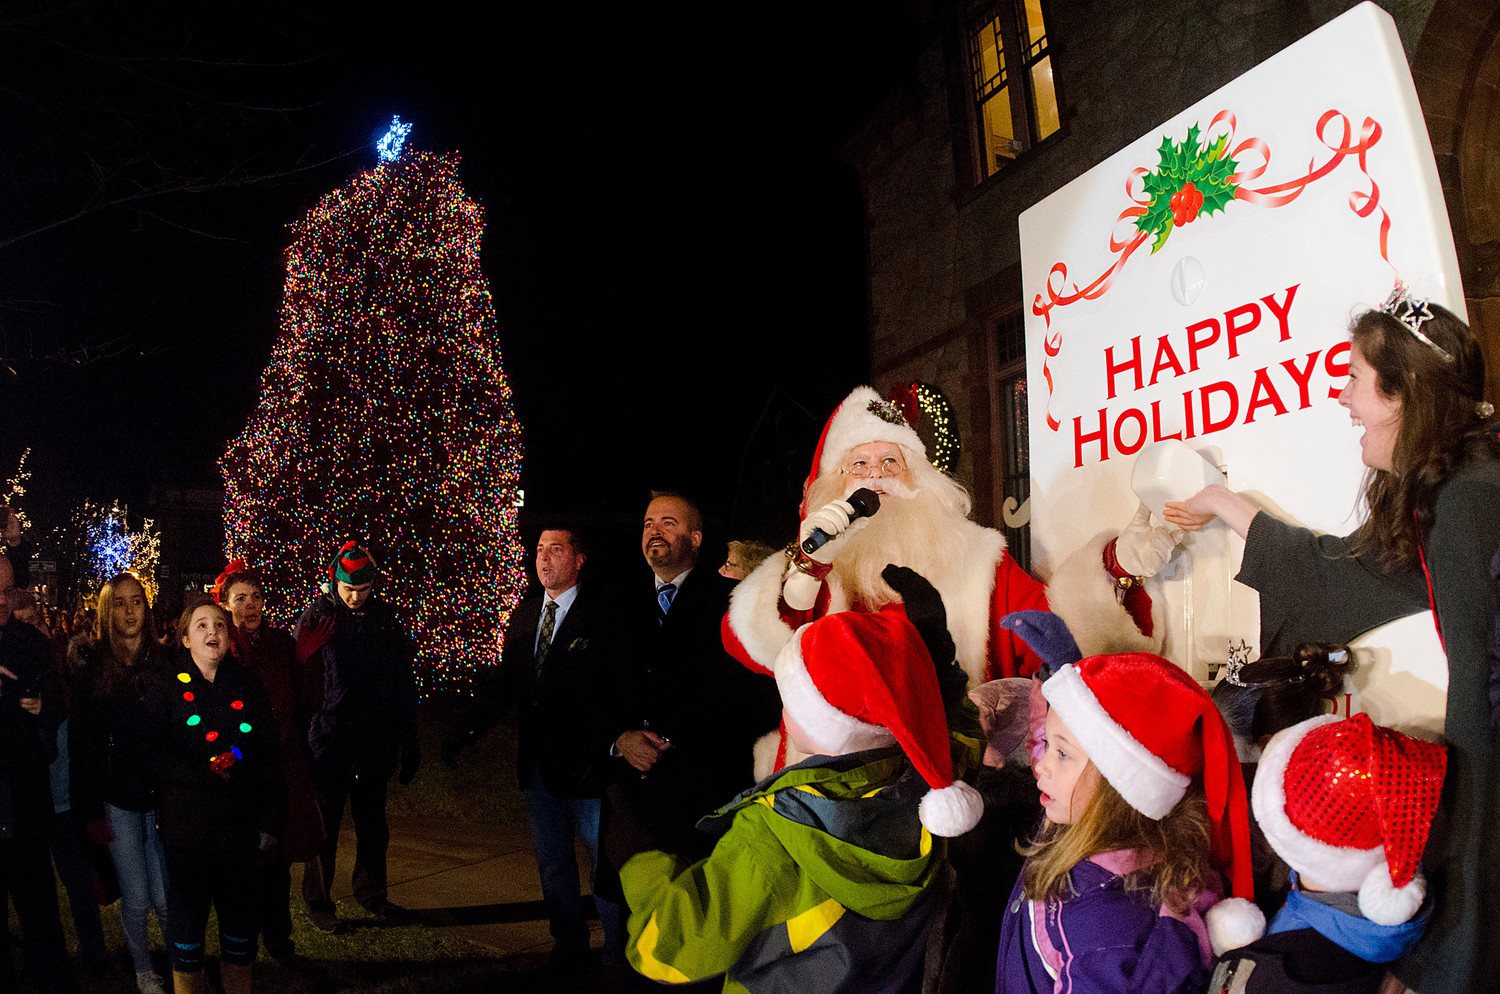 Santa and his elves, including Miss Fourth of July Olivia Borgia and Little Miss Fourth of July Angela Pirri, hit the switch and turn on the Christmas lights during the annual Grand Illumination. This year the lights were colored lights on the tree in front of the Burnside building.